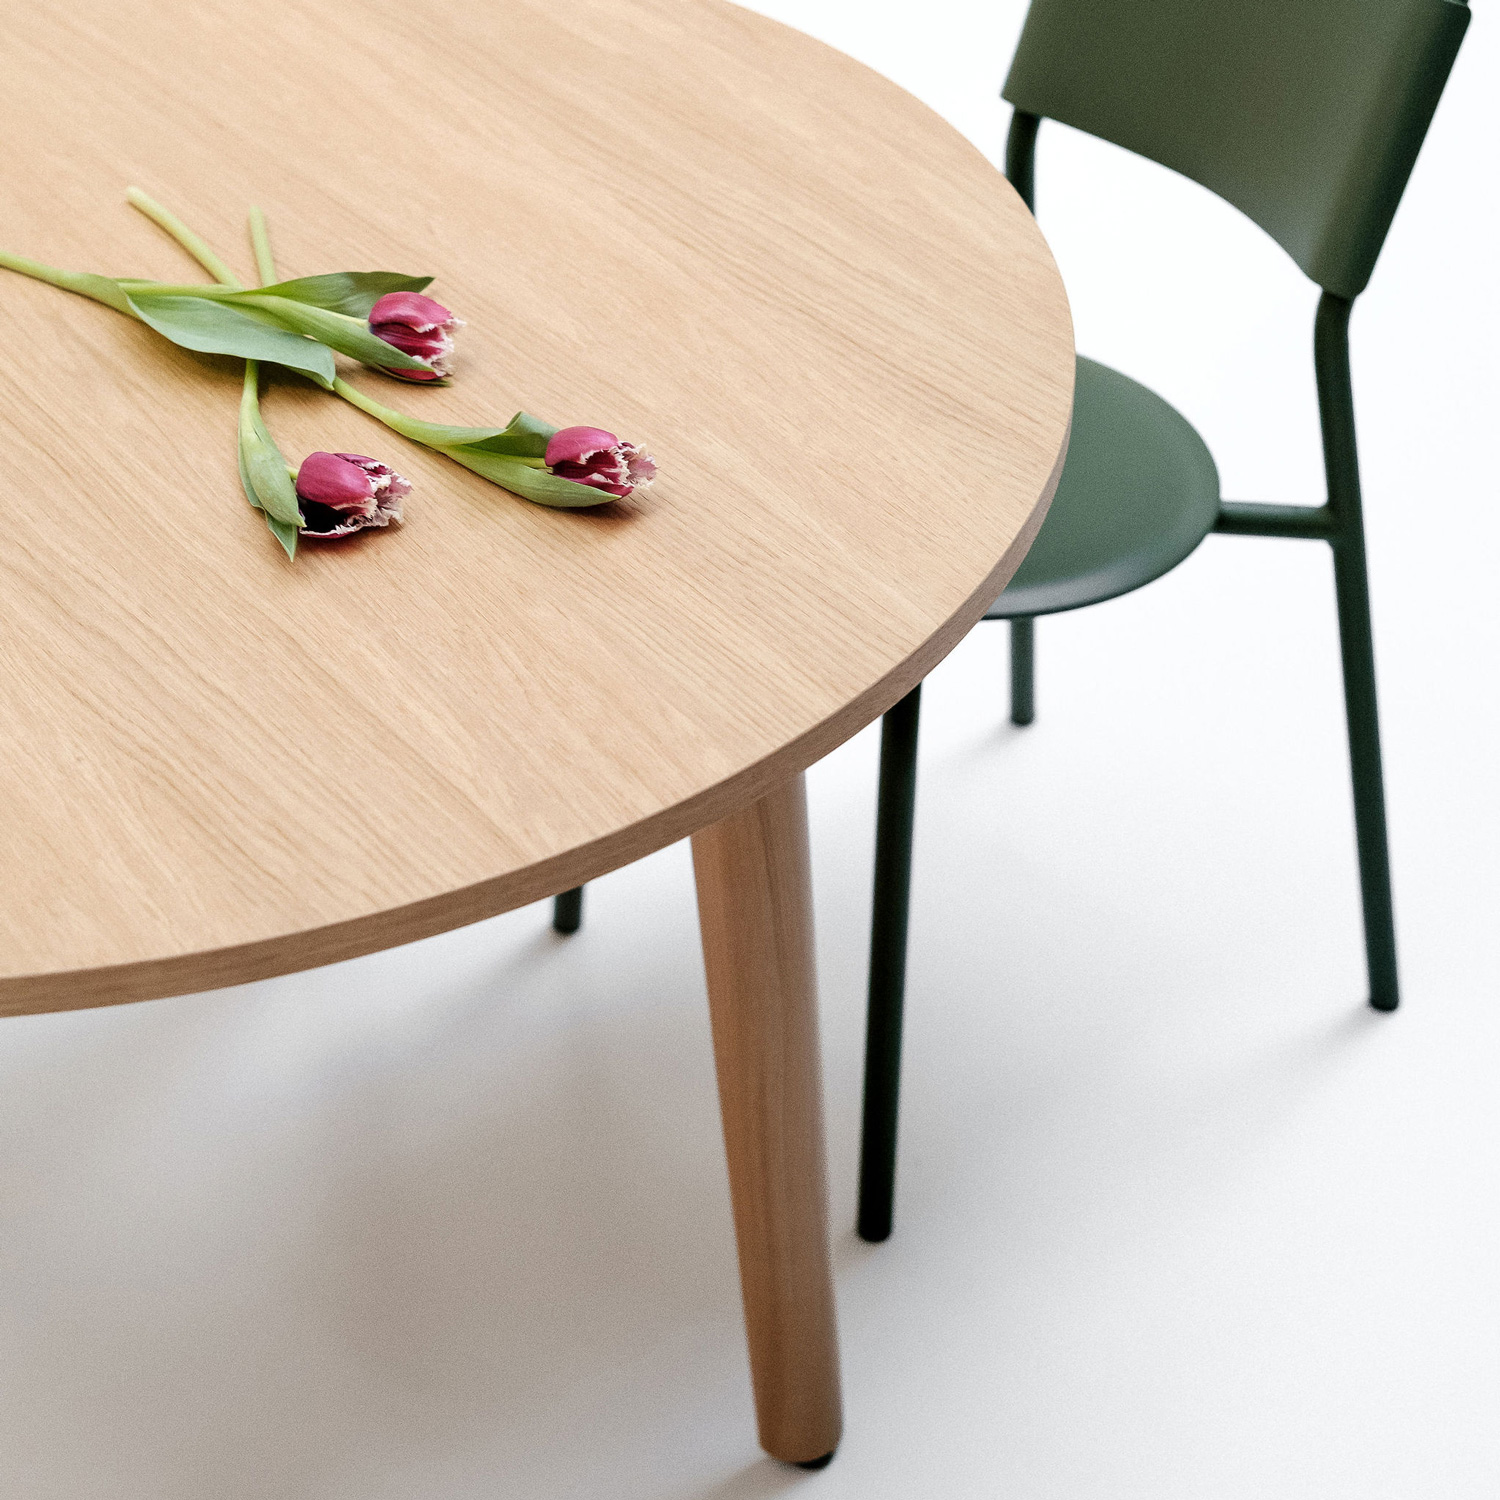 NEW MODERN full wood round table